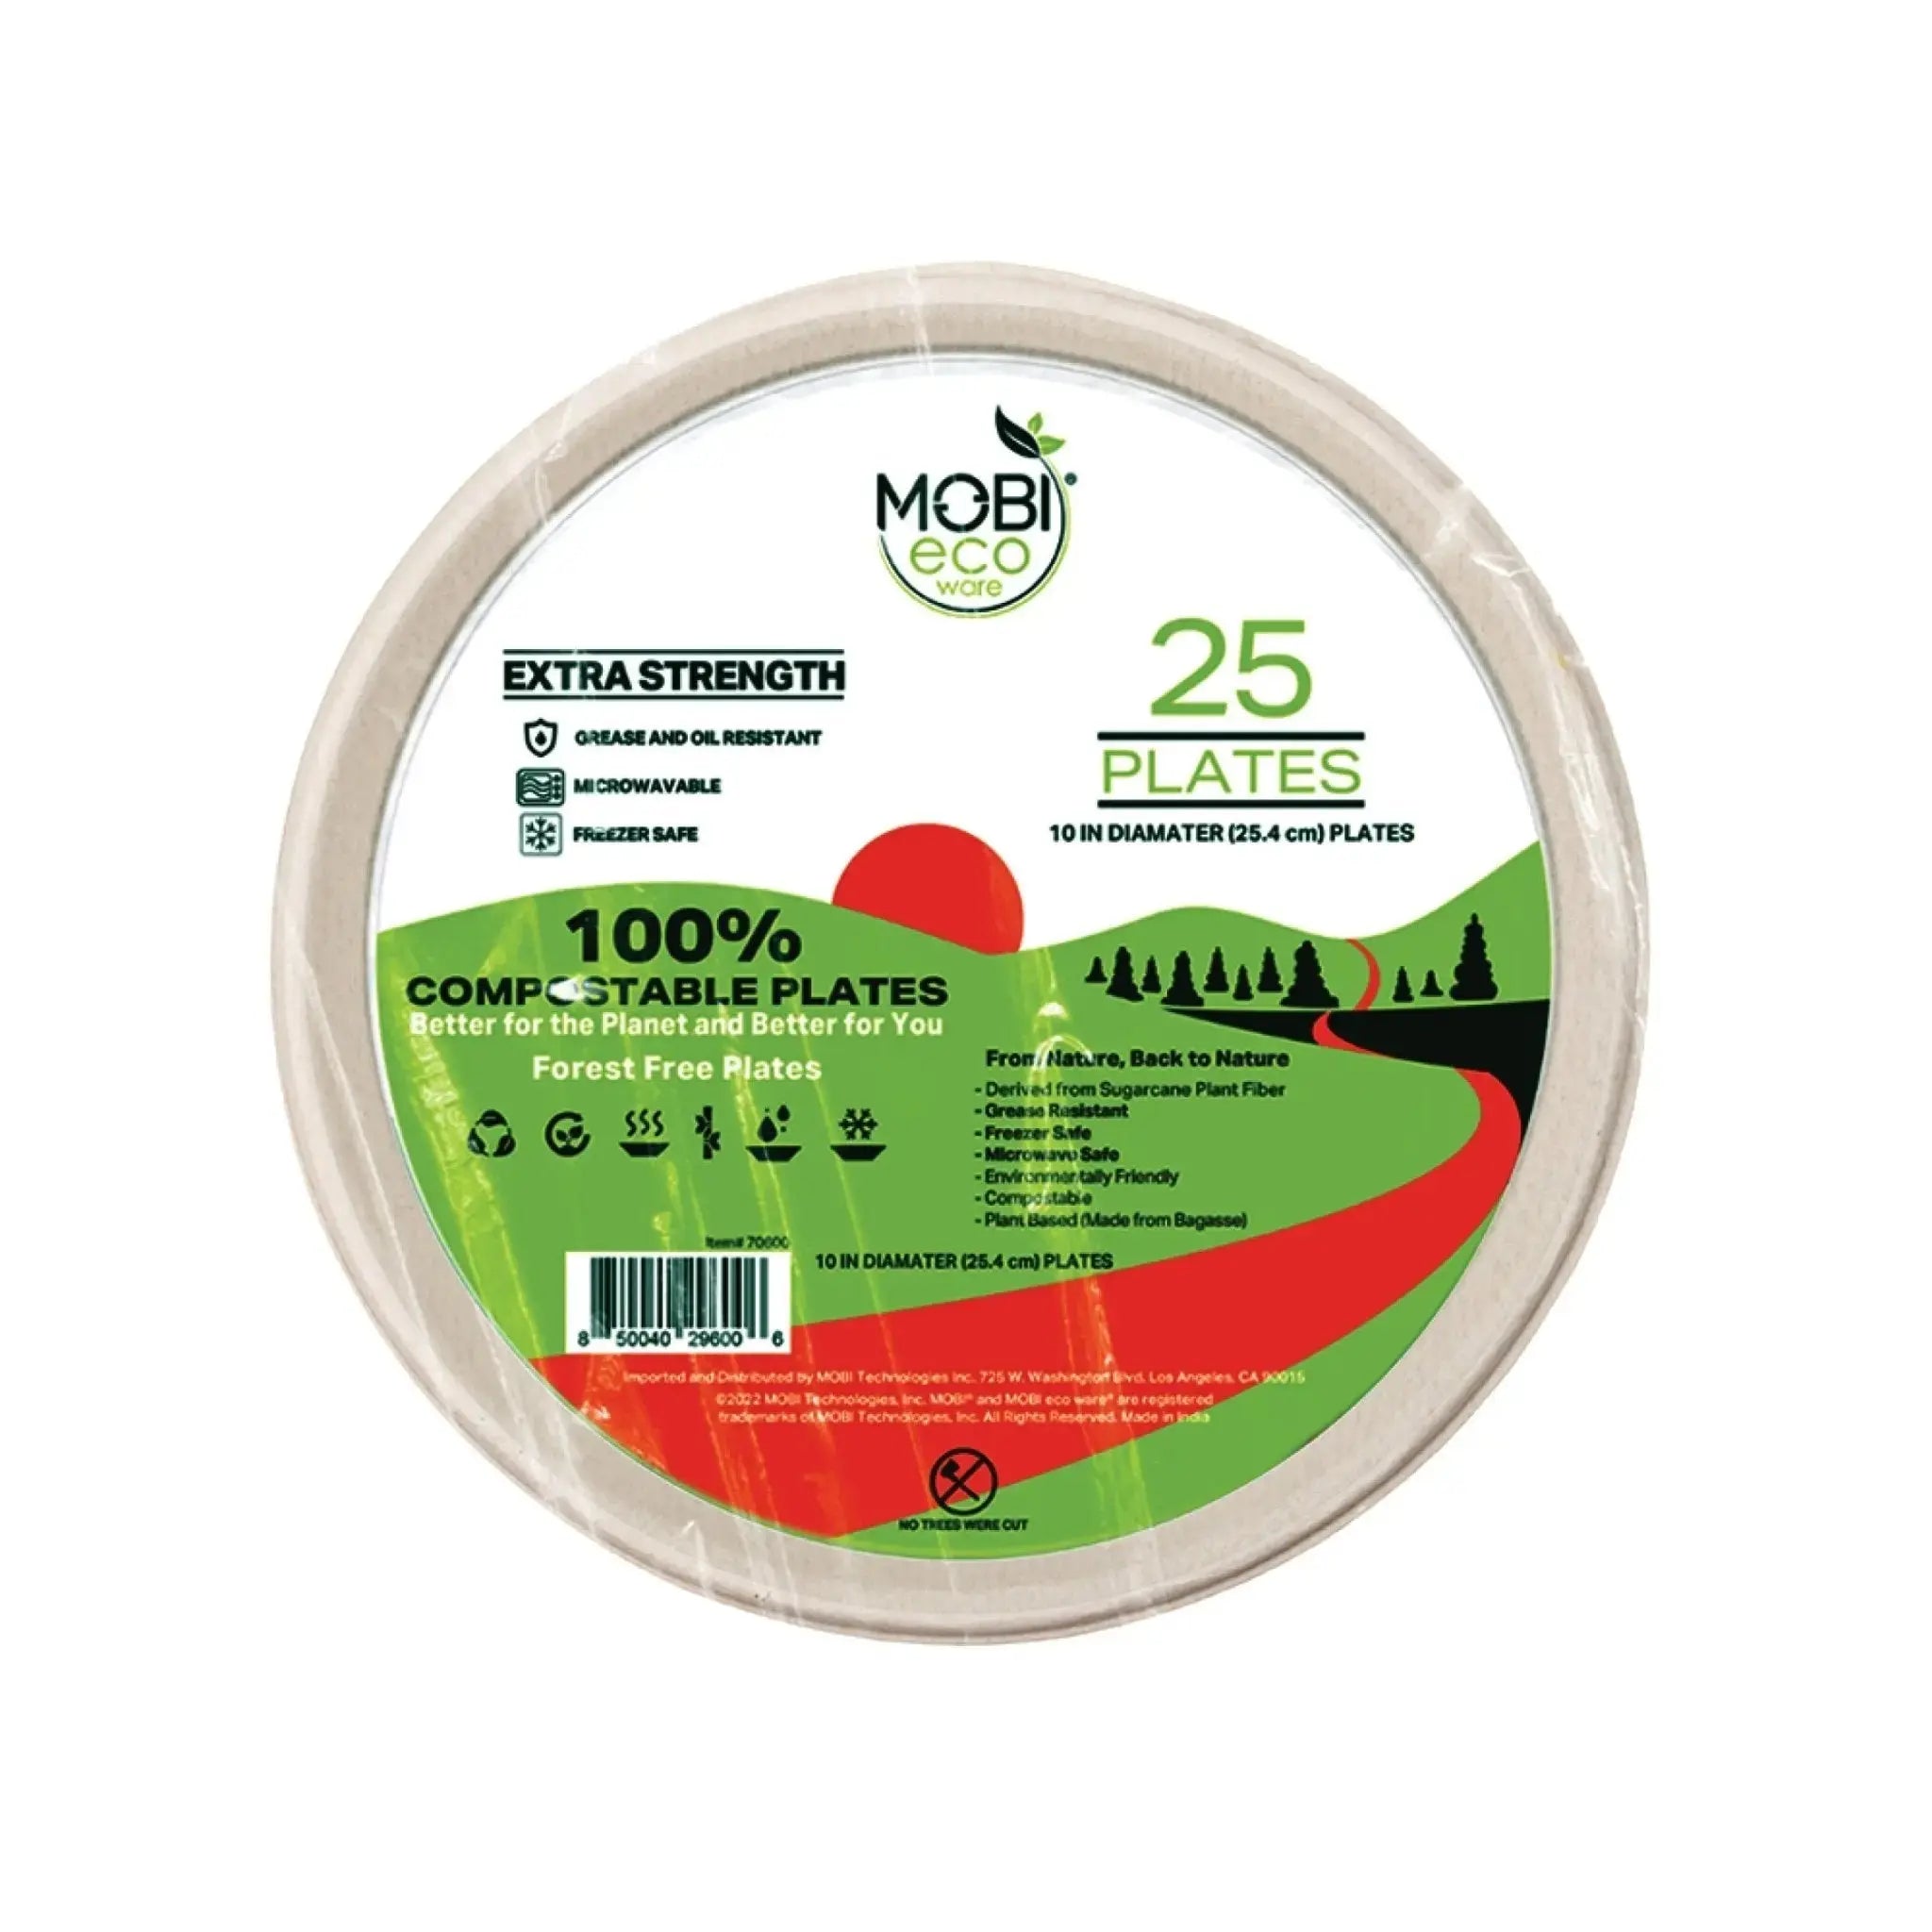 100% Compostable Plates, 10 inch Biodegradable Disposable Paper Plates Bulk for Birthday, Outdoor, Party, Camping, BBQ Eco Friendly 10" Plates by MOBI Ecoware, 25-pack - MOBI USA